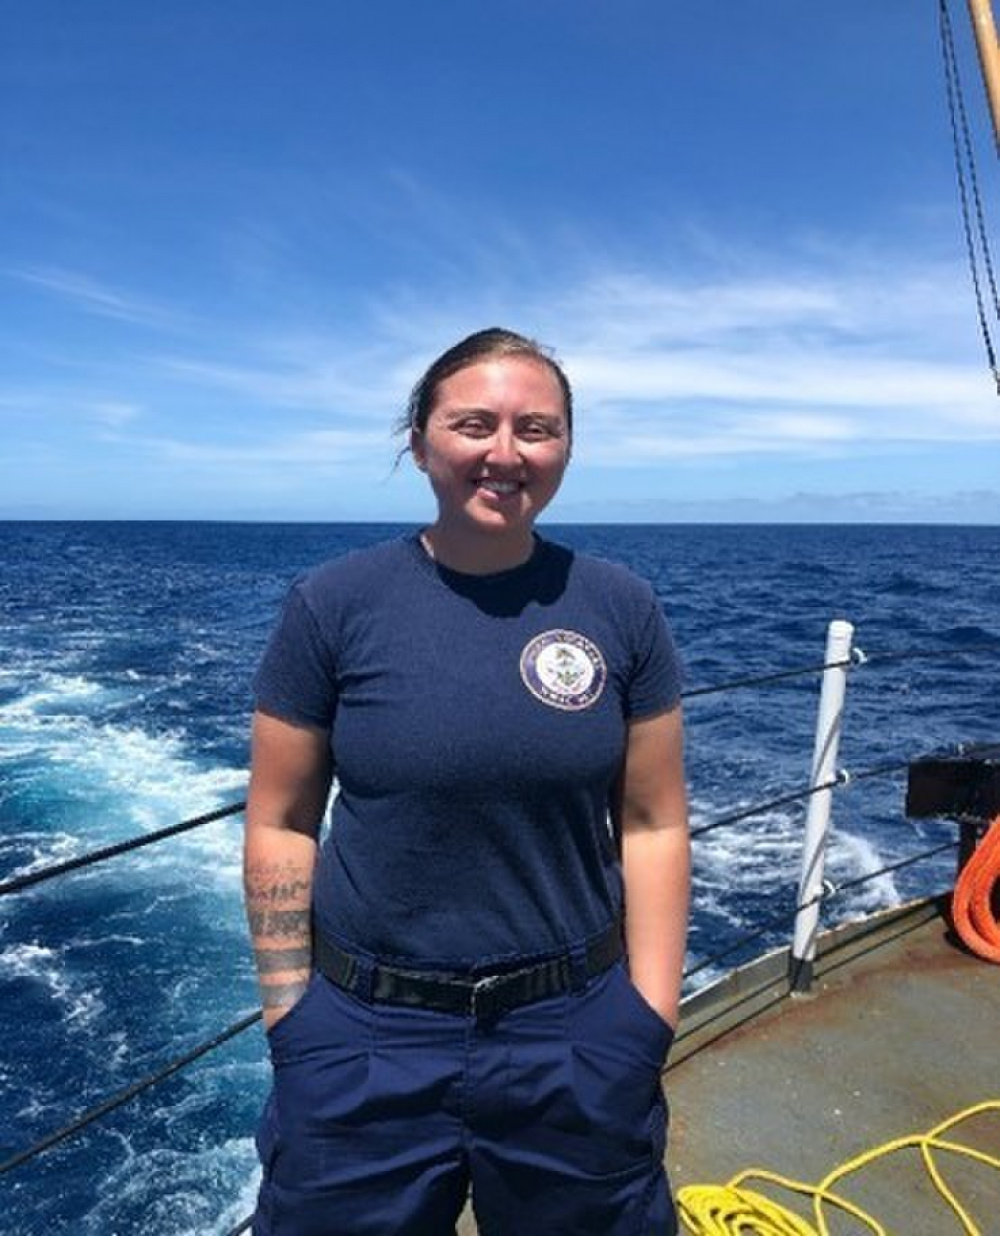 BM1 Sydney Adams is currently a Boatswain’s Mate serving on CGC ESCANABA homeported in Boston, MA (U.S. Coast Guard Photo).